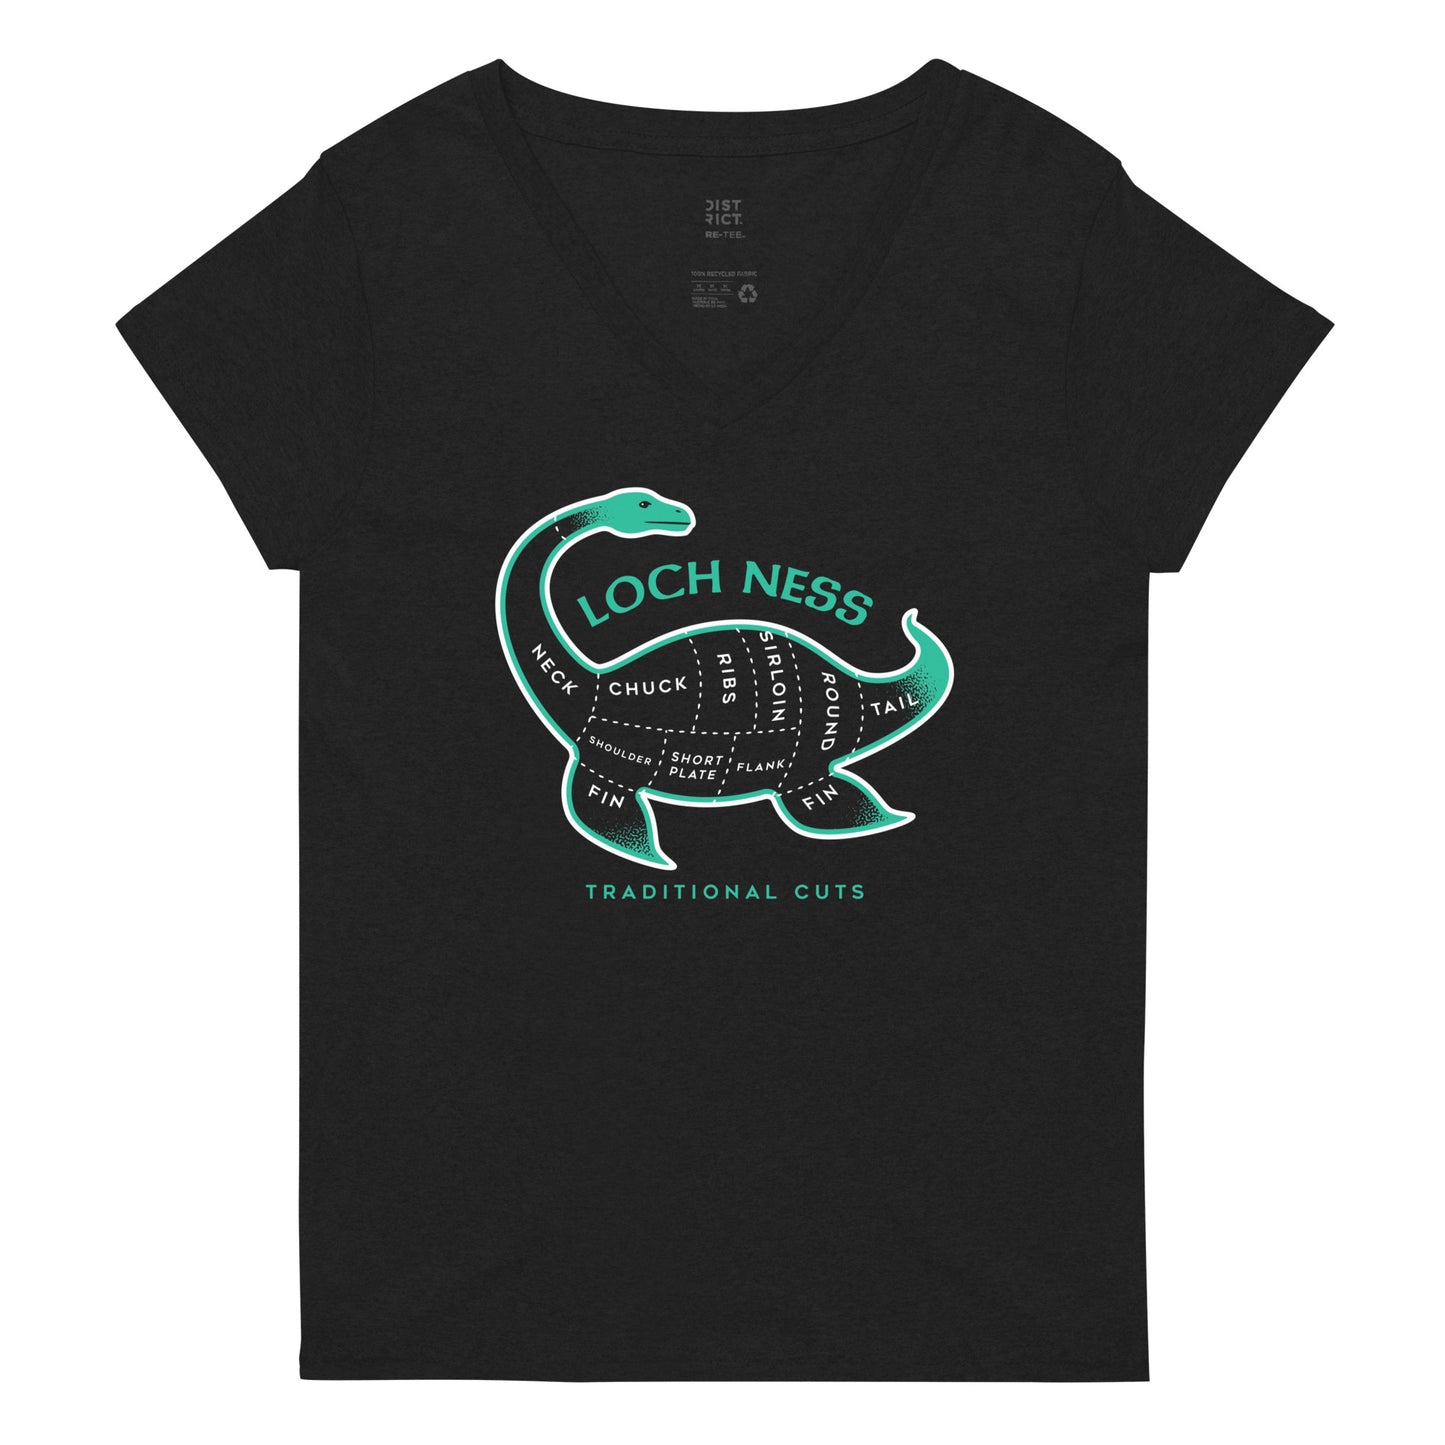 Loch Ness Traditional Cuts Women's V-Neck Tee